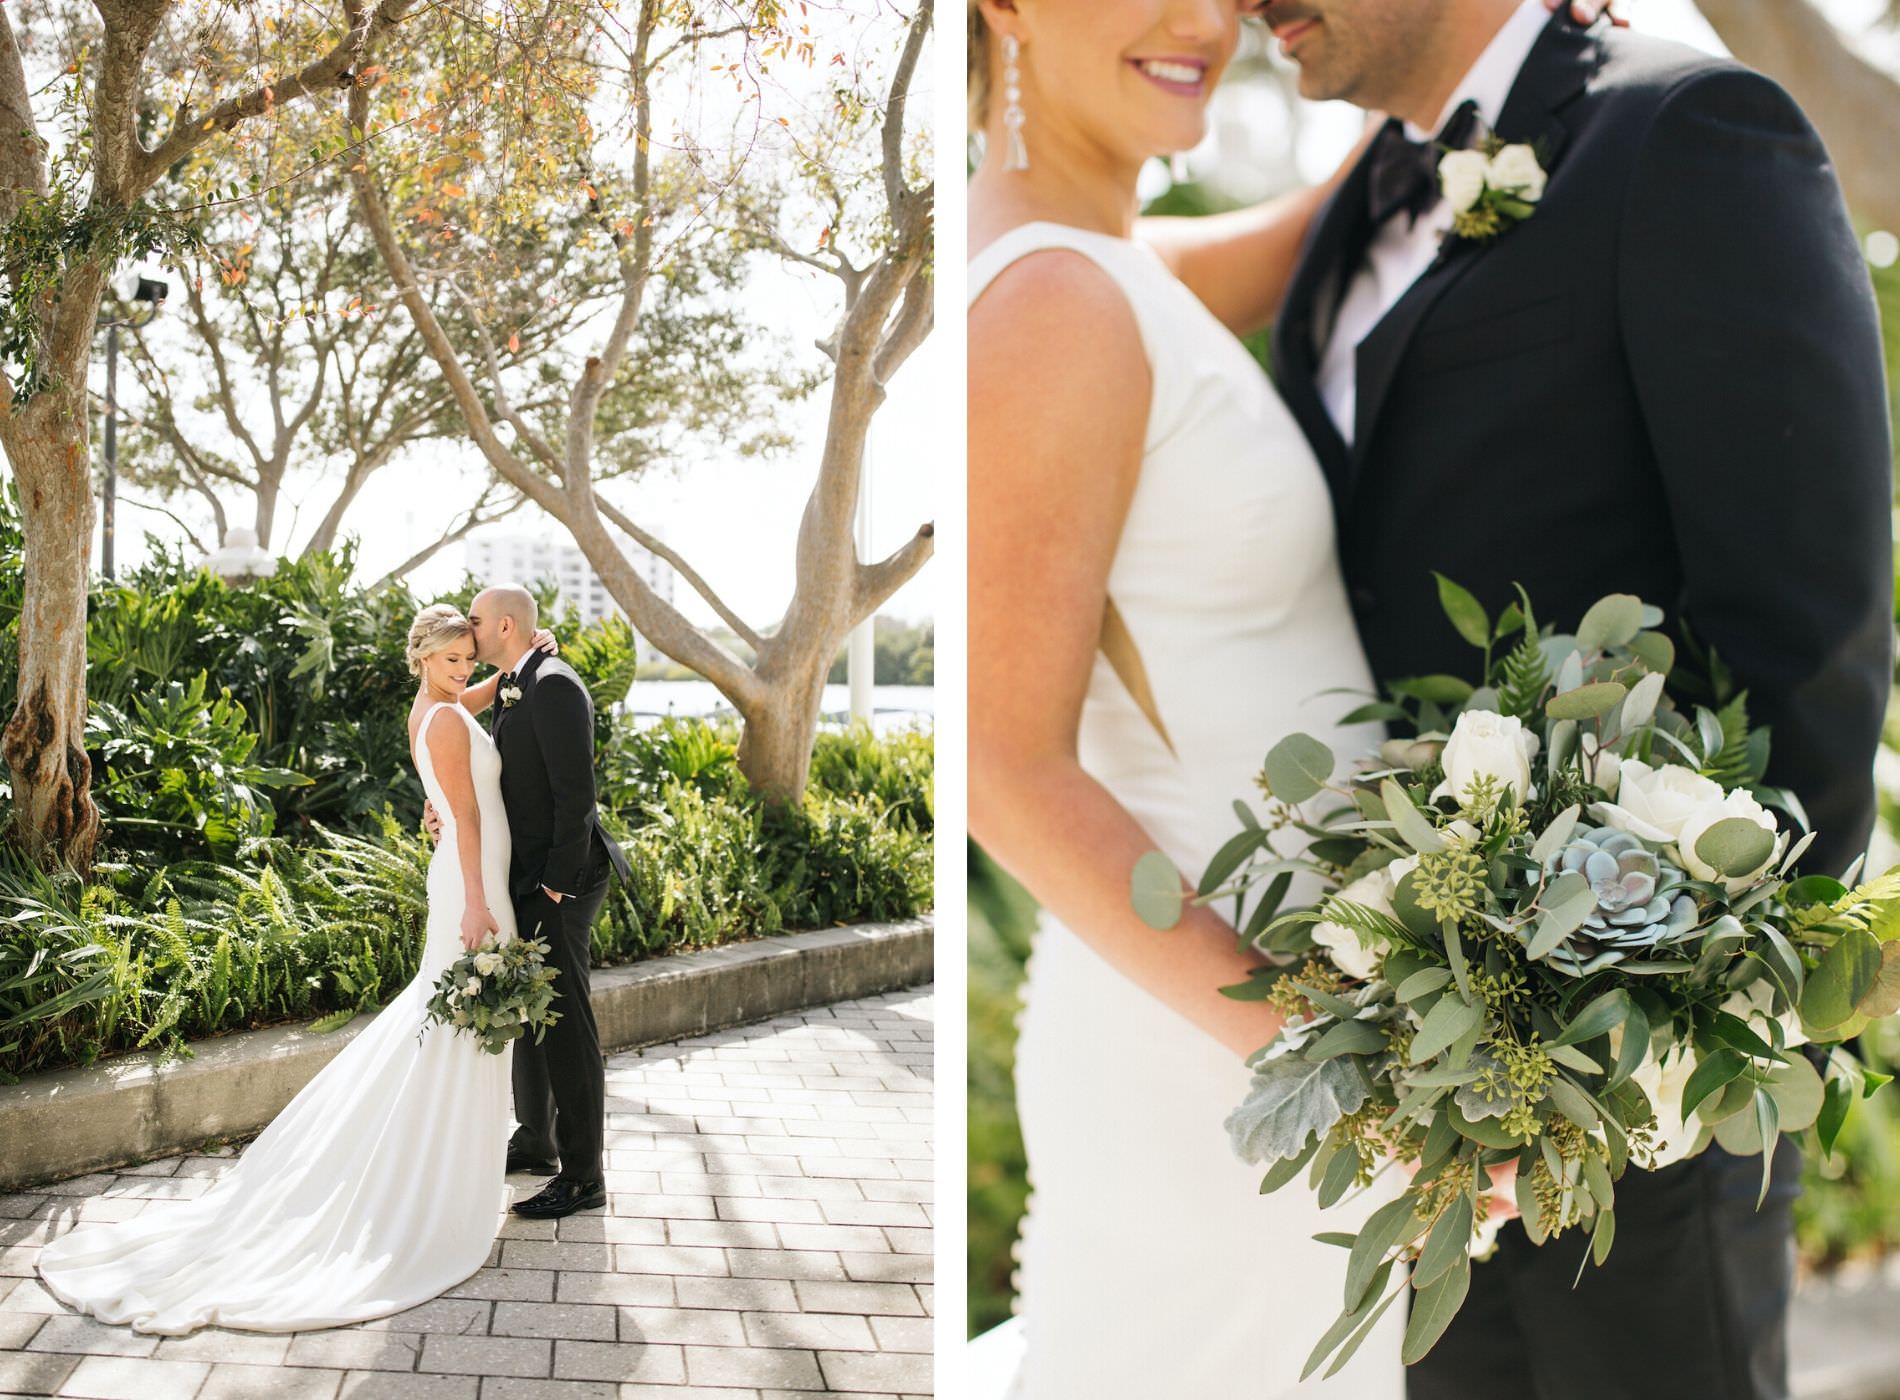 Bride and Groom Outdoor Portrait | Simple Sheath Ivory Crepe Bateau Neck Bridal Gown by Theia | Groom in Classic Black Tux Suit with Bow Tie | Natural Loose Greenery Bridal Bouquet with Eucalyptus and Succulents and White Roses